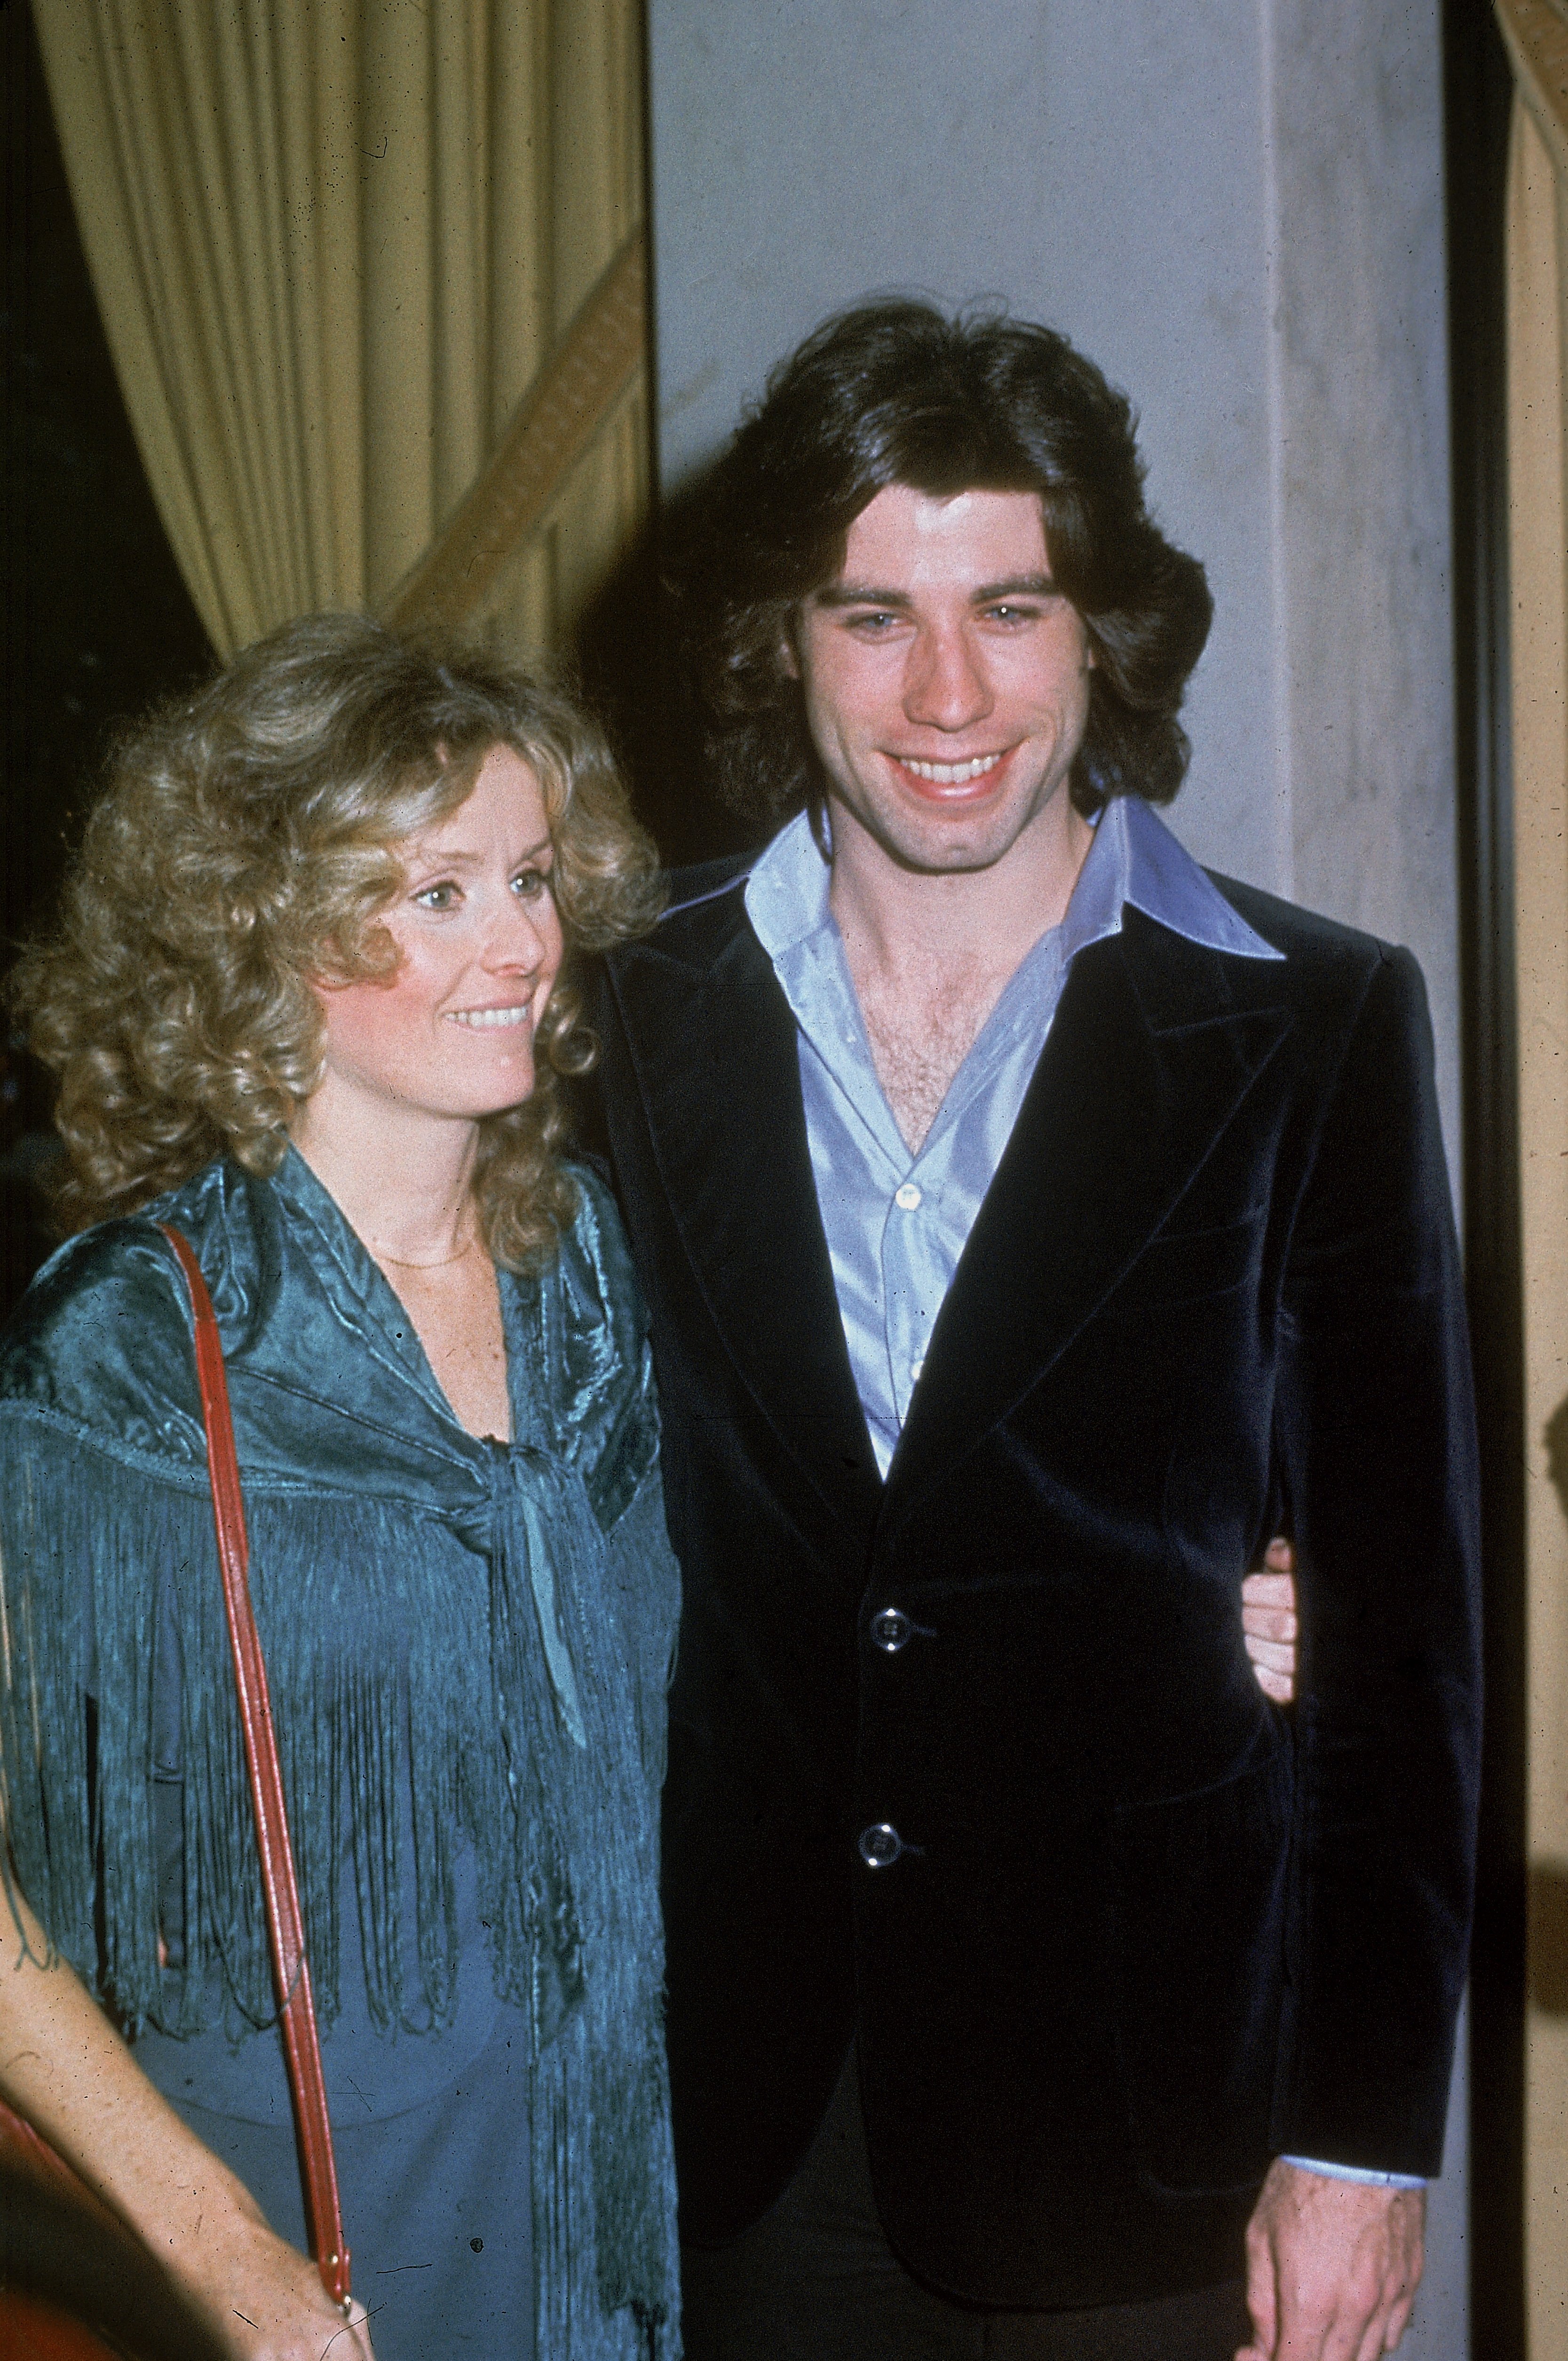 American actor John Travolta poses with his girlfriend Dianna Hyland at the Golden Apple Awards, 1976. | Source: Getty Images